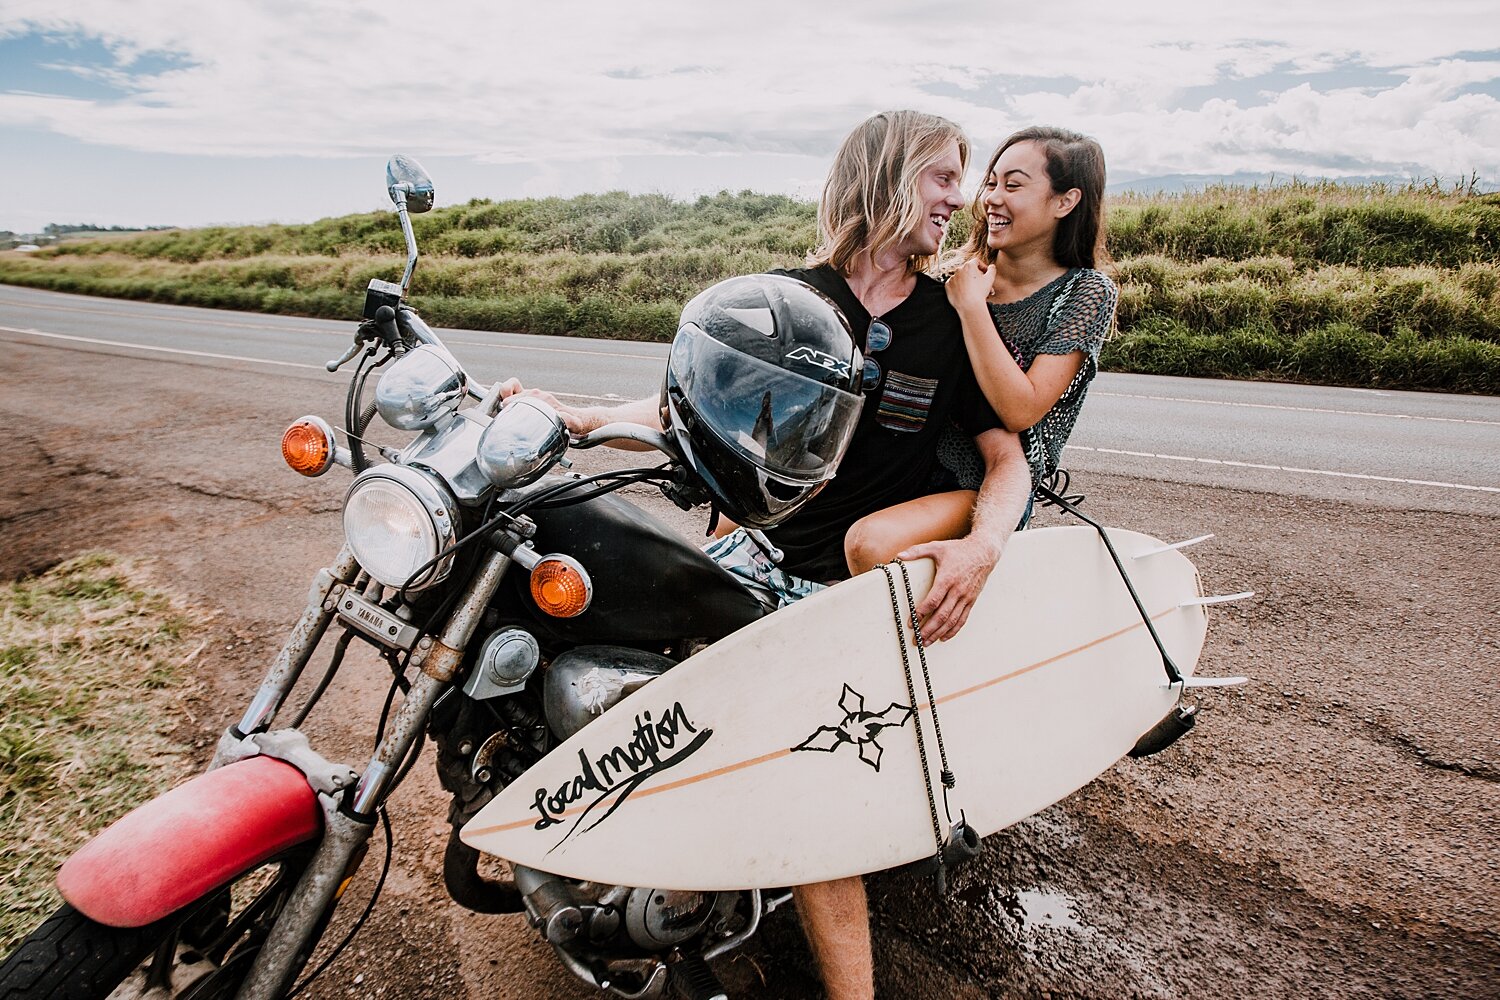 couple on motorcycle, couple riding a motorcycle, maui hawaii photographer, maui hawaii surfing, surfing at ho'okipa beach, ho'okipa beach engagements, motorcycle engagements